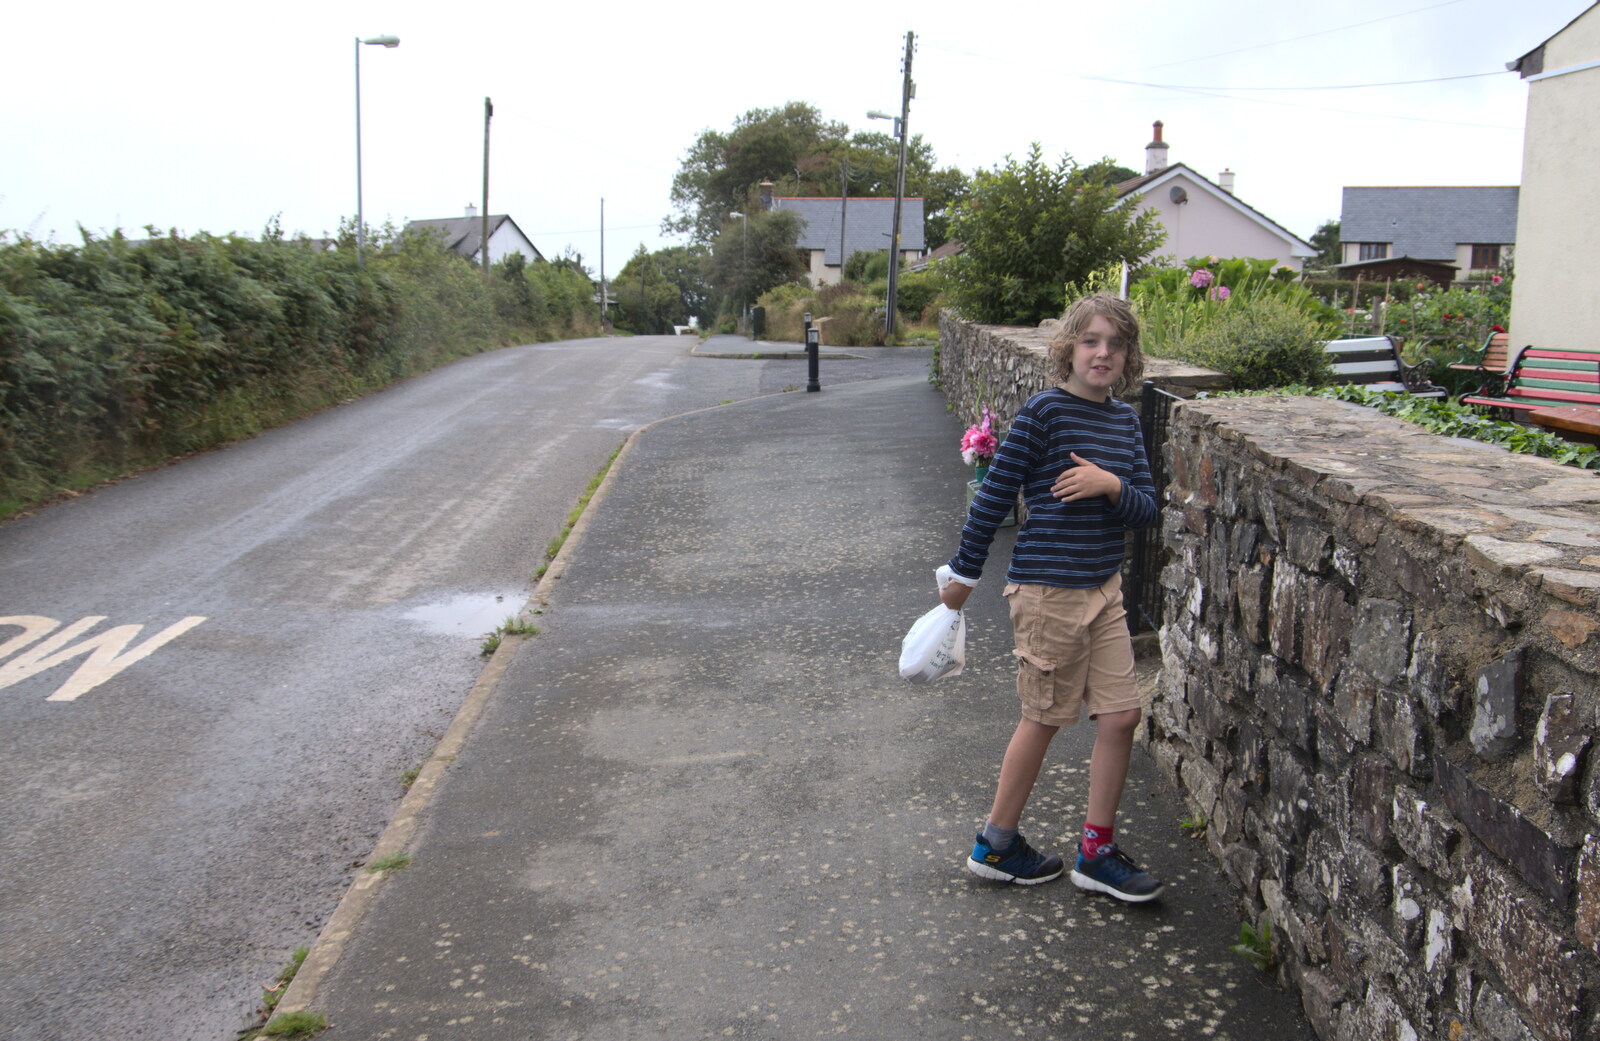 Fred on the road through Spreyton from A Game of Cricket, and a Walk Around Chagford, Devon - 23rd August 2020